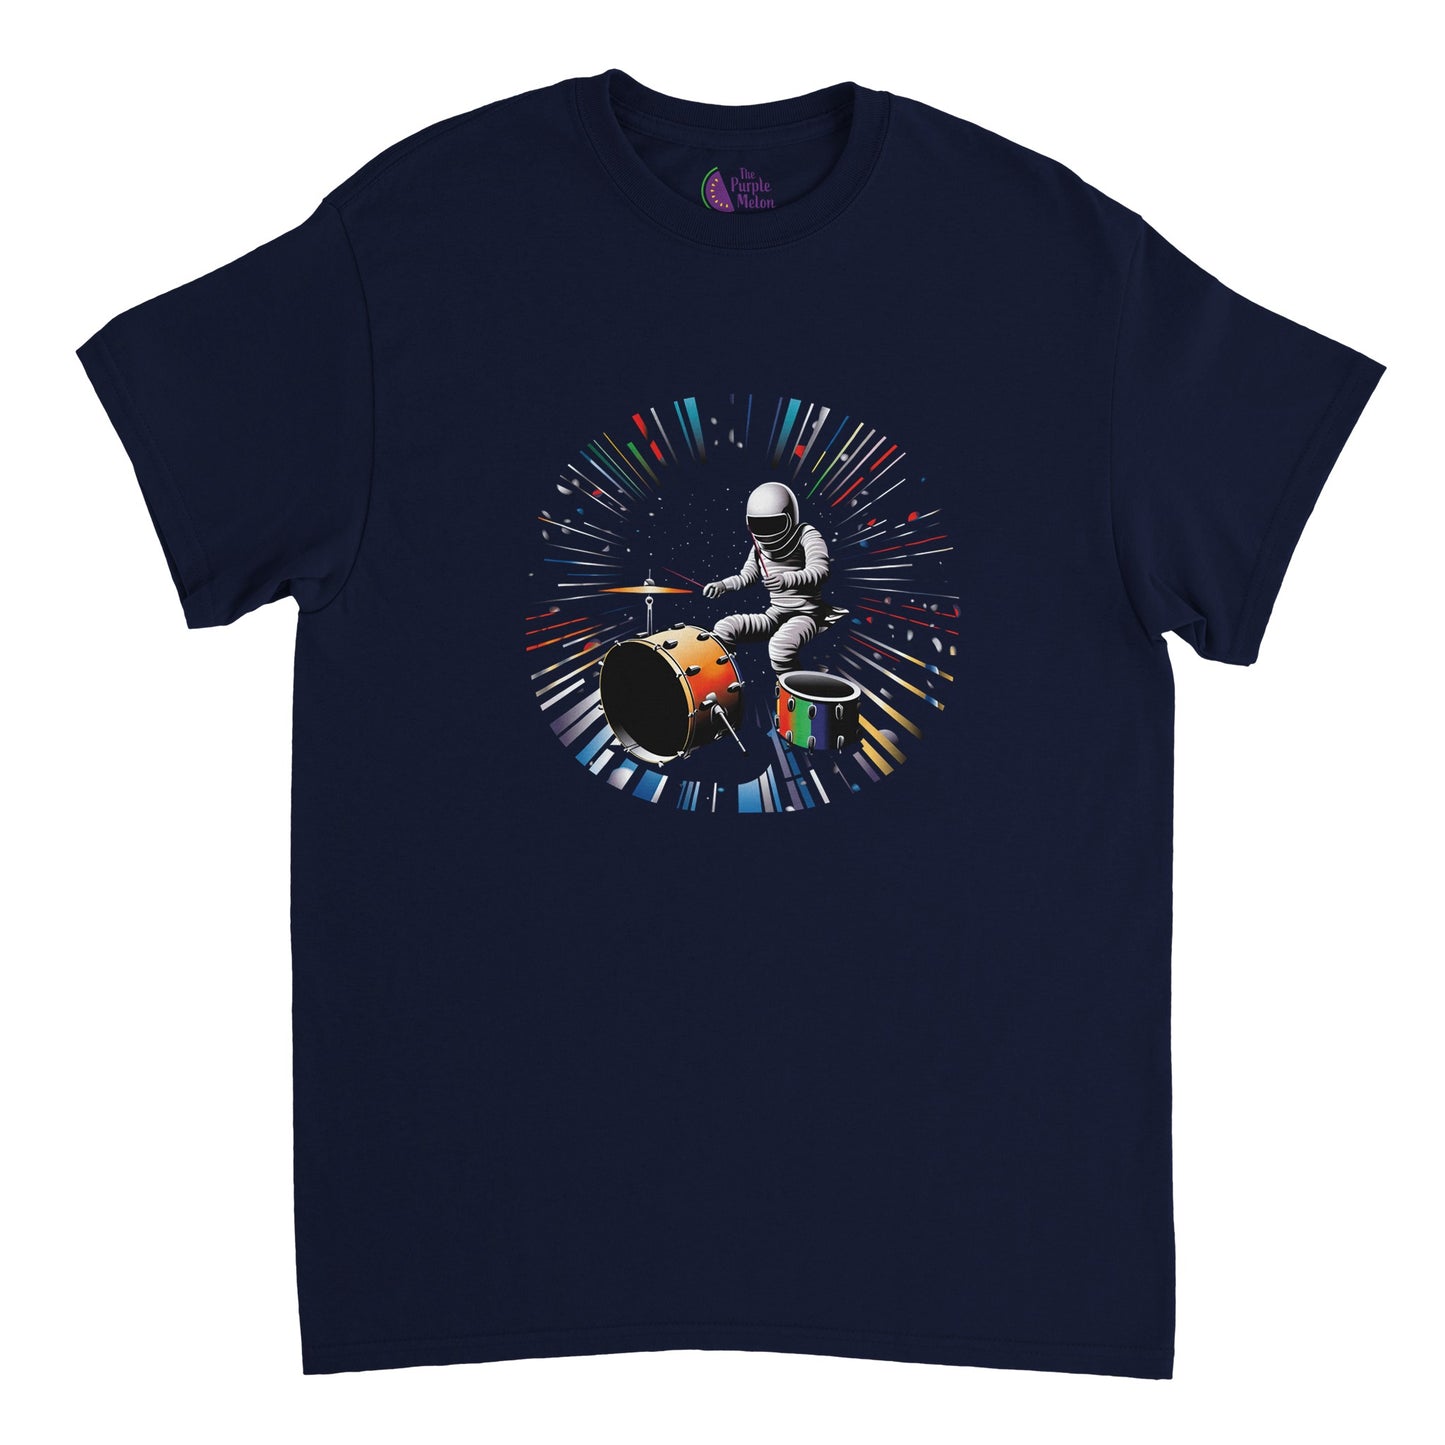 navy blue t-shirt with a spaceman playing the drums